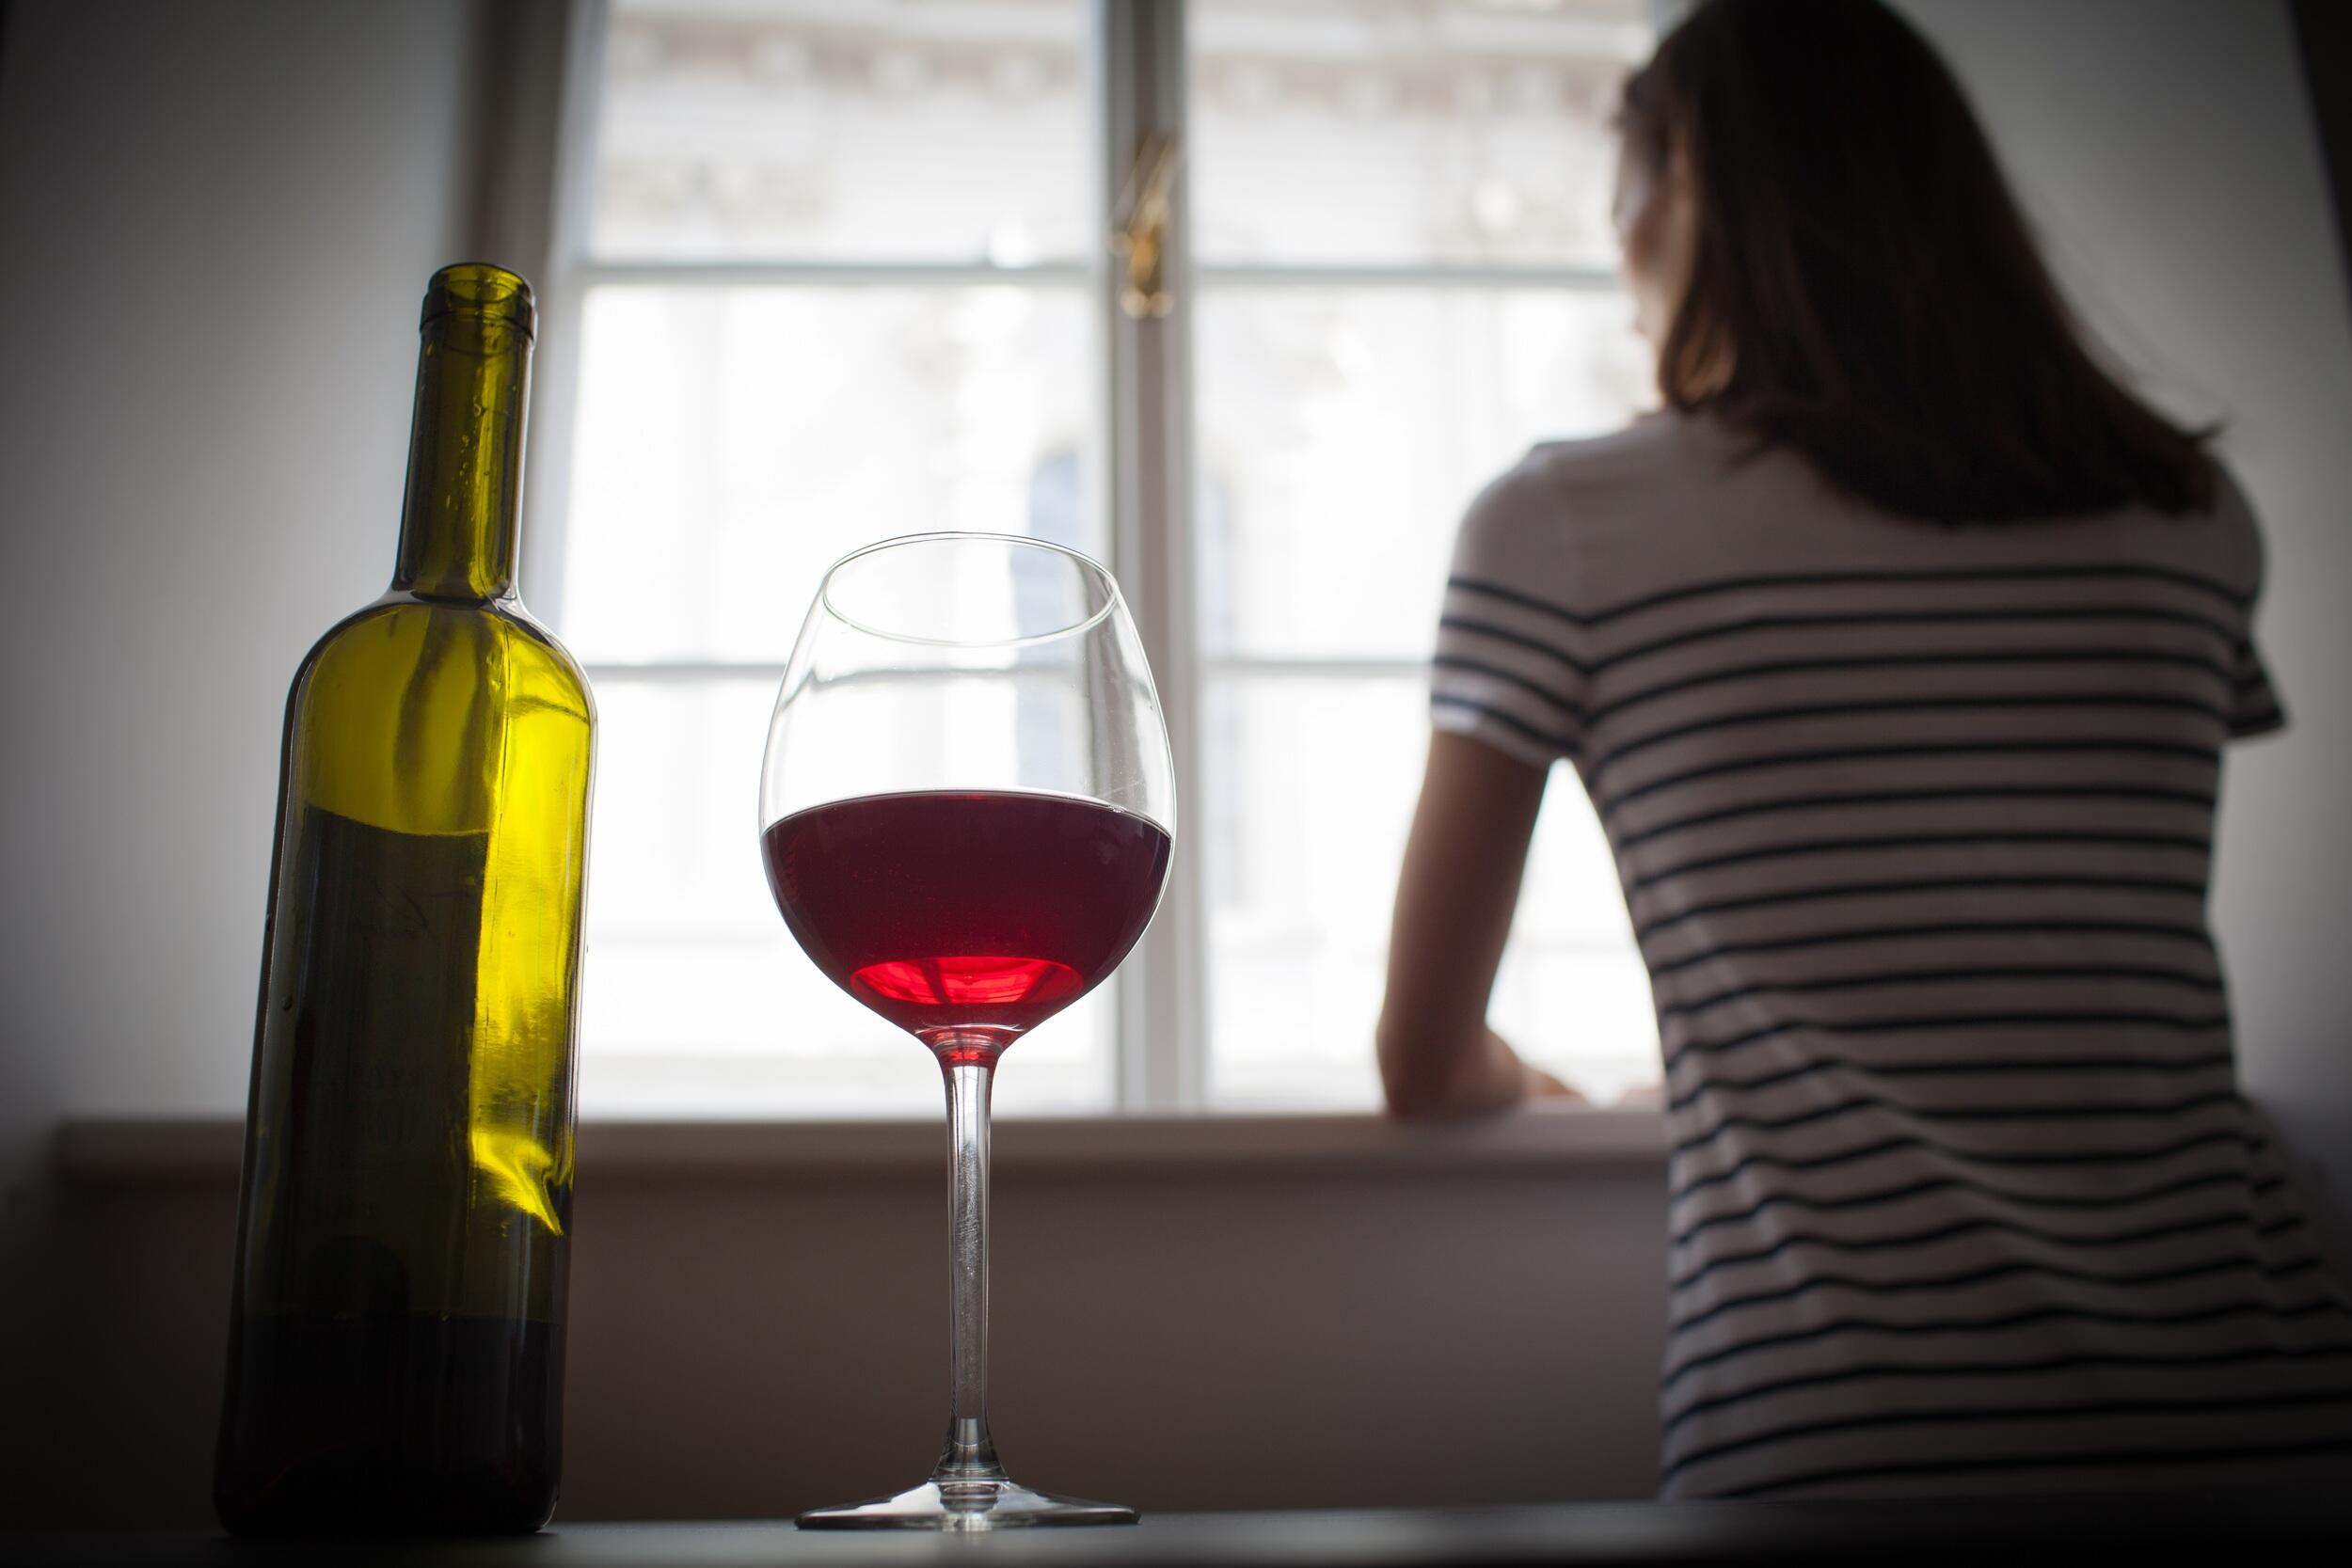 A wine bottle and a half-filled glass of wine sit on a surface while a person looks out a window in the background.